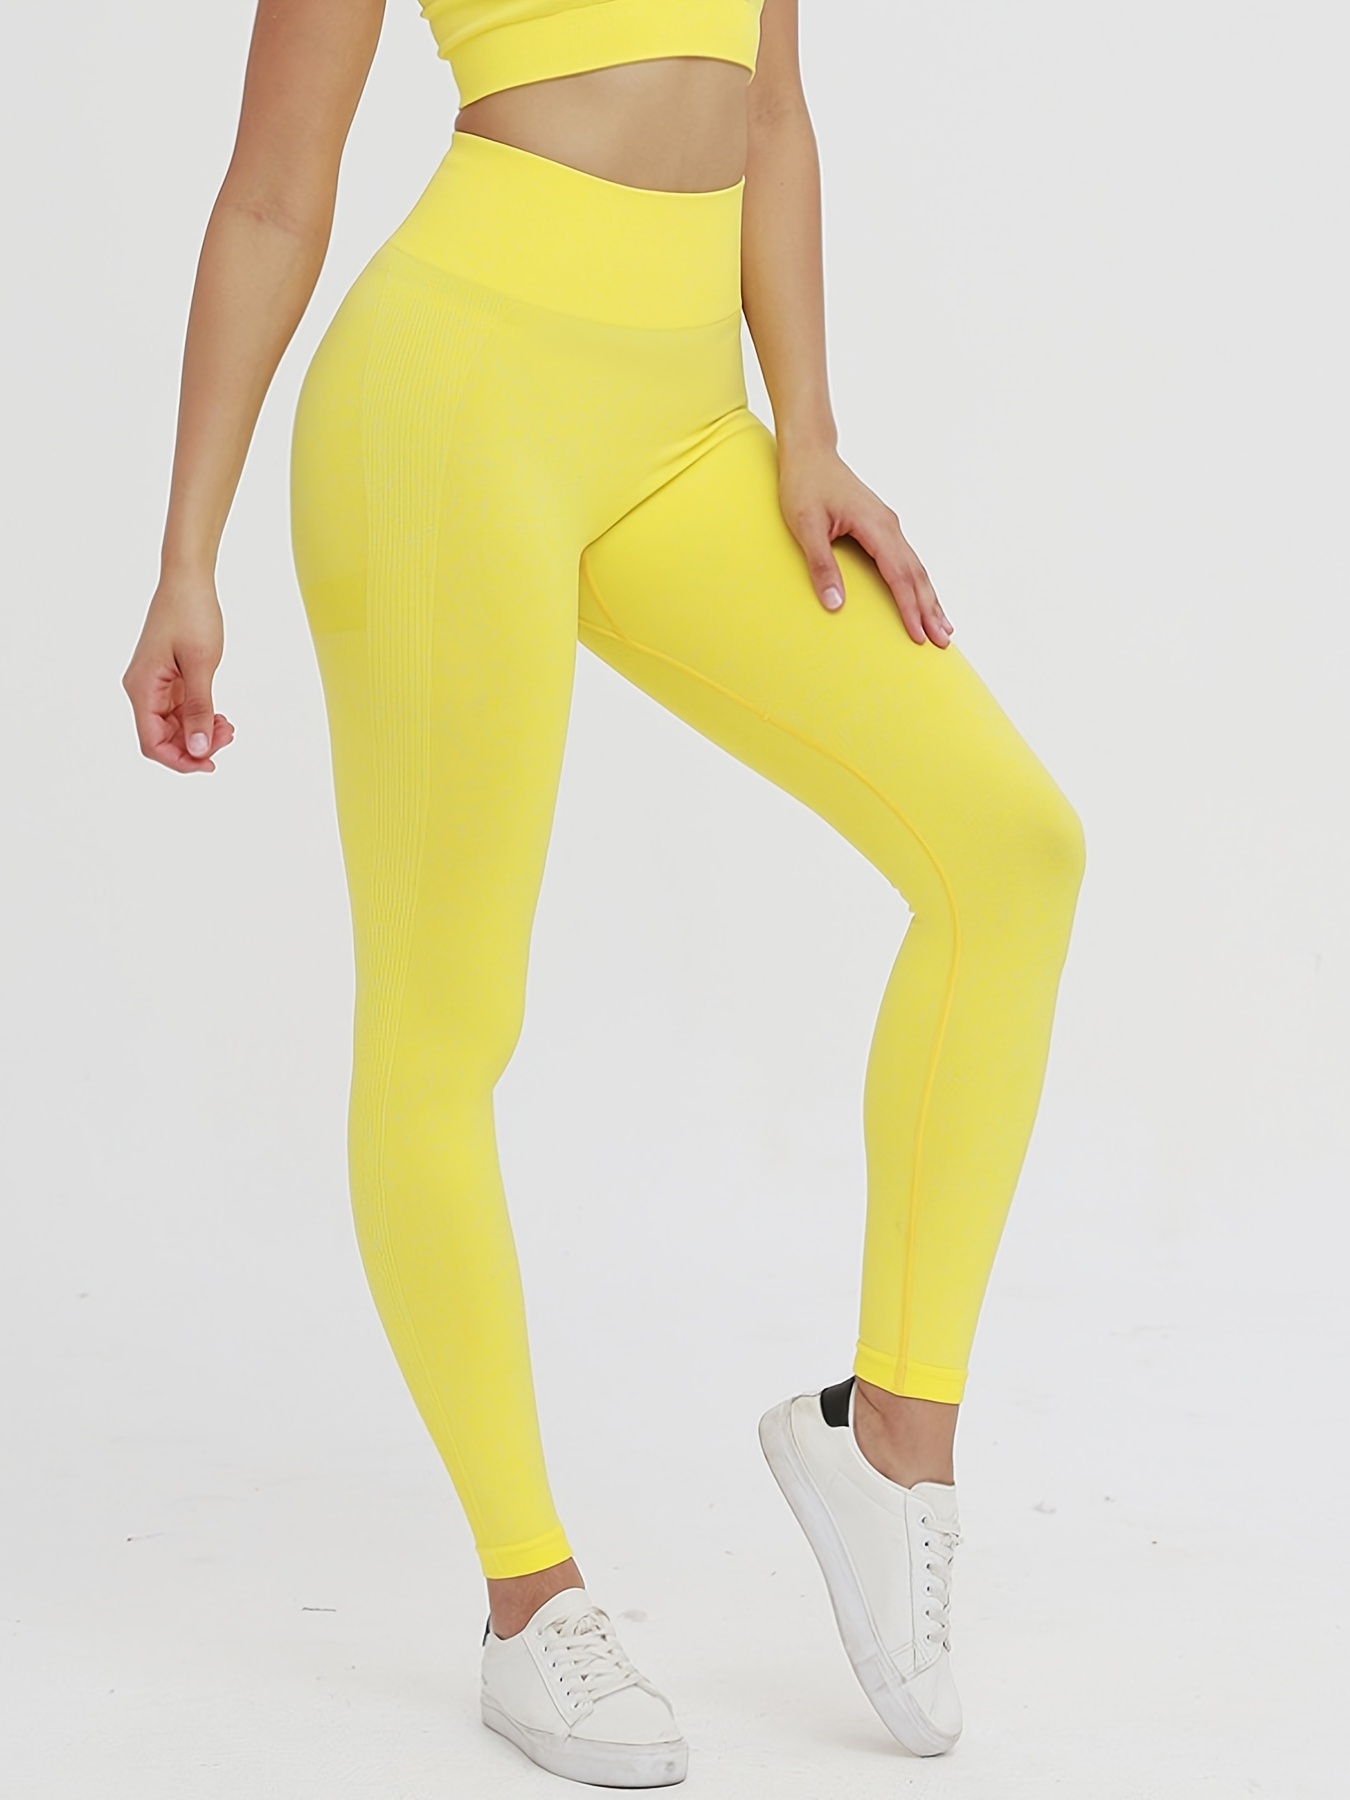 Clearance Under $5 Clothing,Fitness Sports Stretch High Waist Skinny Sexy  Yoga Pants With Pockets Yellow M 